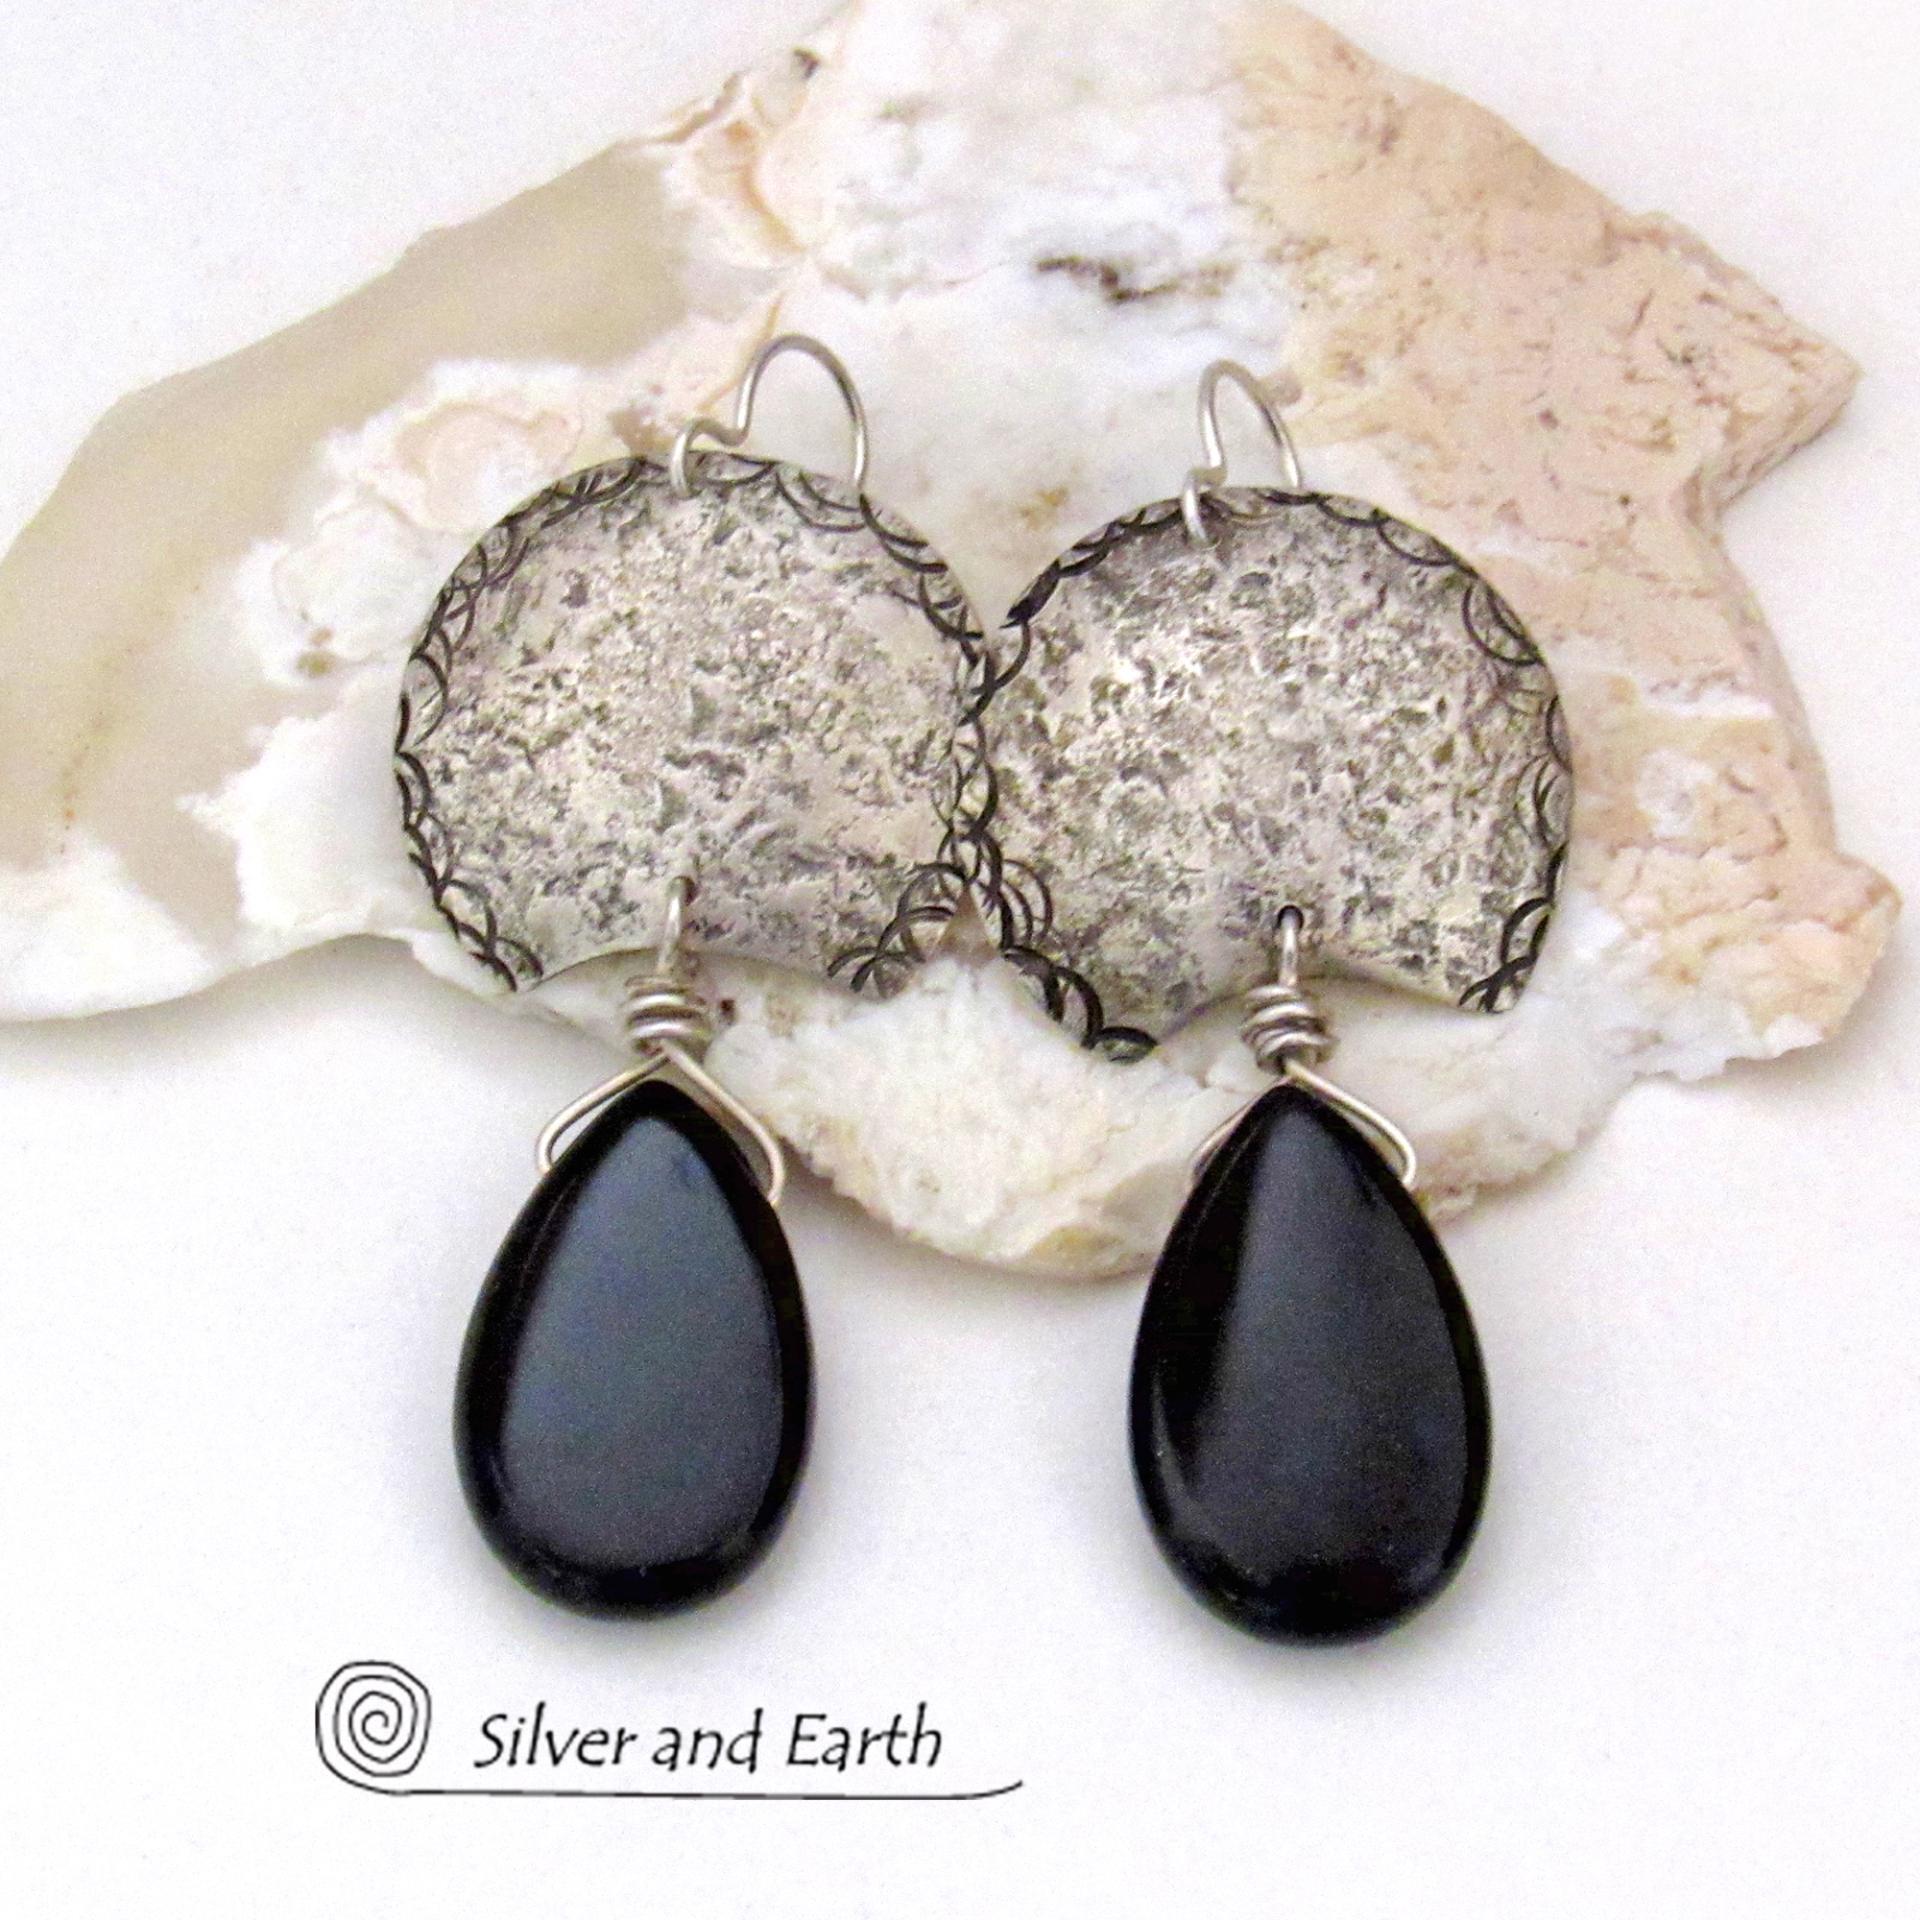 Sterling Silver Earrings with Black Onyx - Urban Modern Jewelry | Silver  and Earth Jewelry